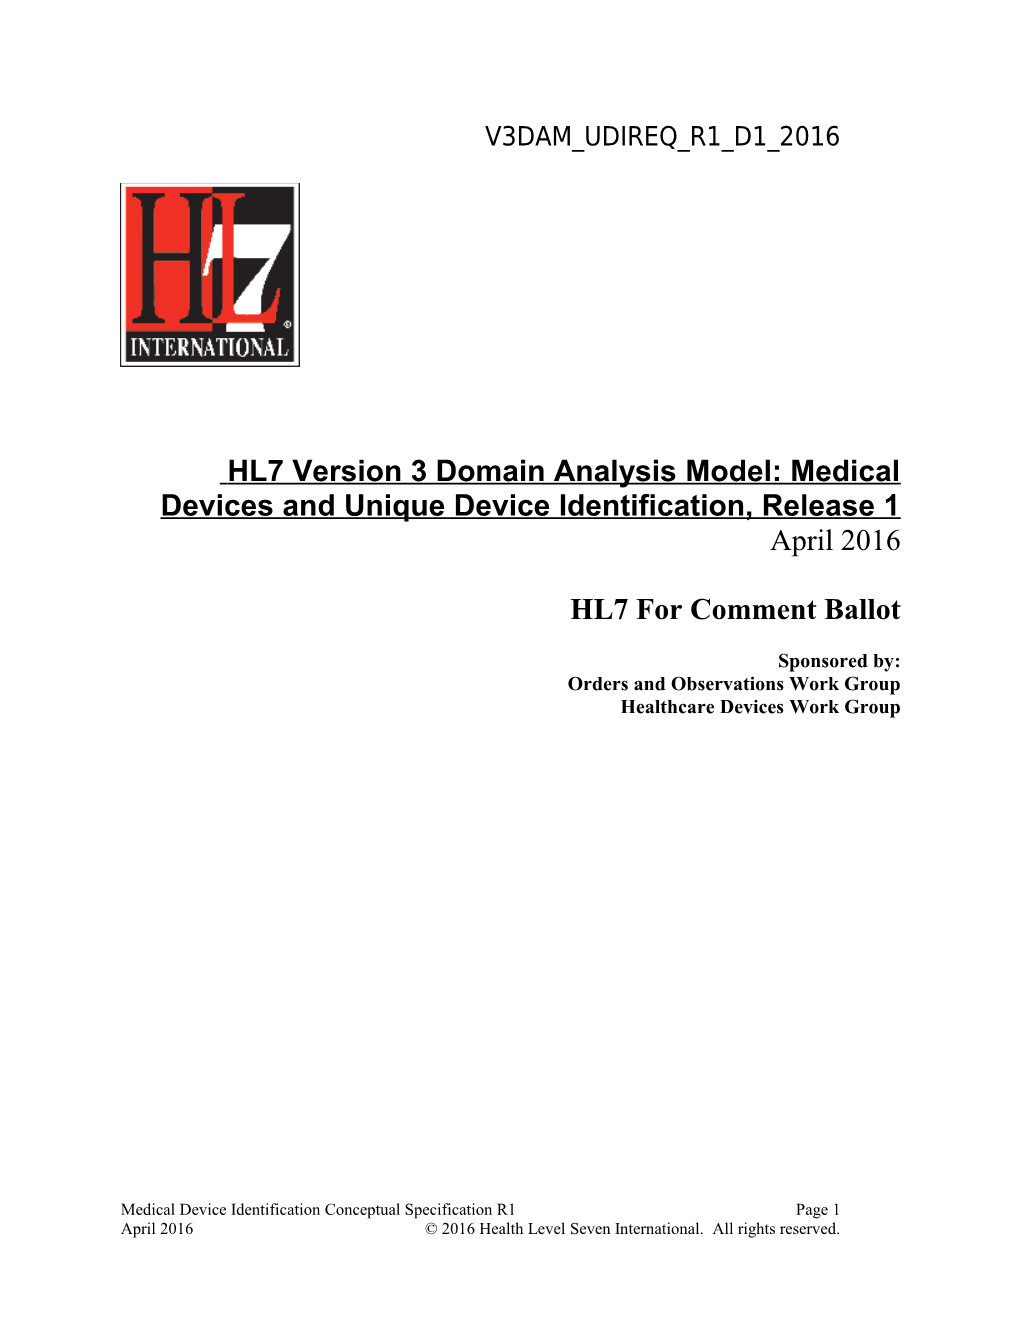 HL7 Version 3 Domain Analysis Model: Medical Devices and Unique Device Identification